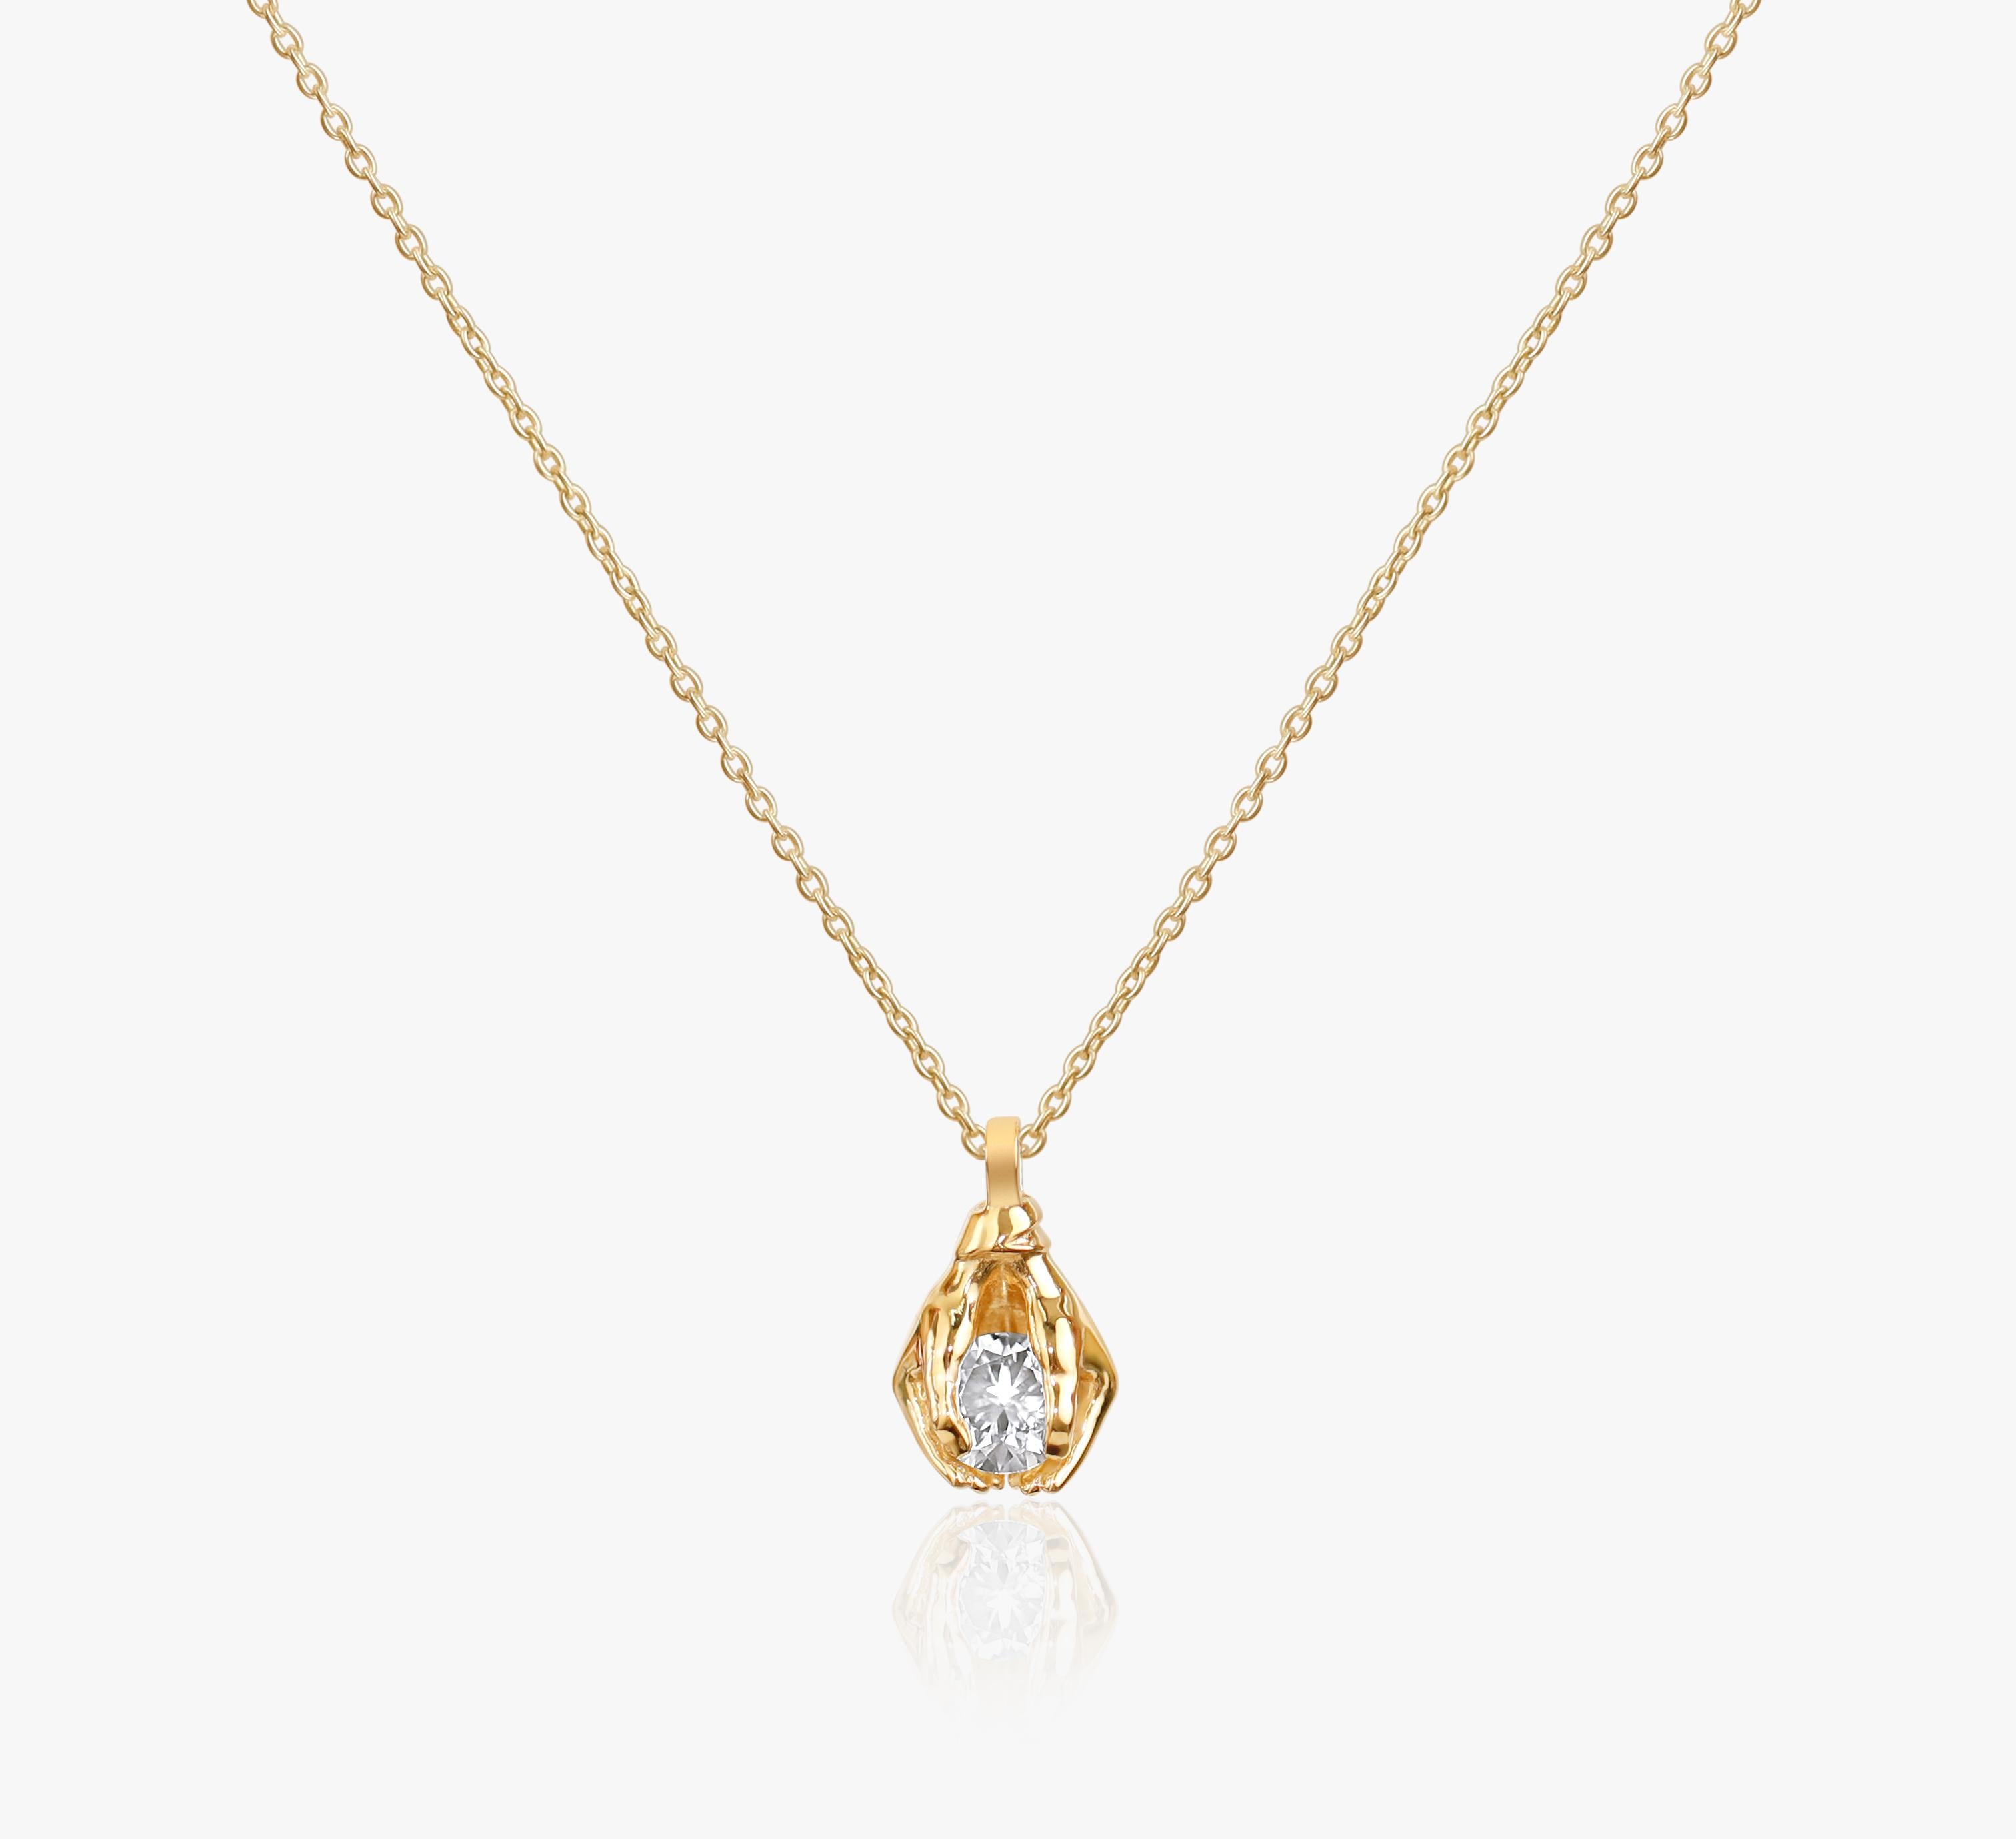 GIA Report Certified 1.25 Carat F VS Round Cut Diamond Pendant Necklace

Available in 18k Yellow gold.

Same design can be made also with other custom gemstones per request.

Product details:

- Solid gold 18k yellow 

- Main stone - approx. 1 carat